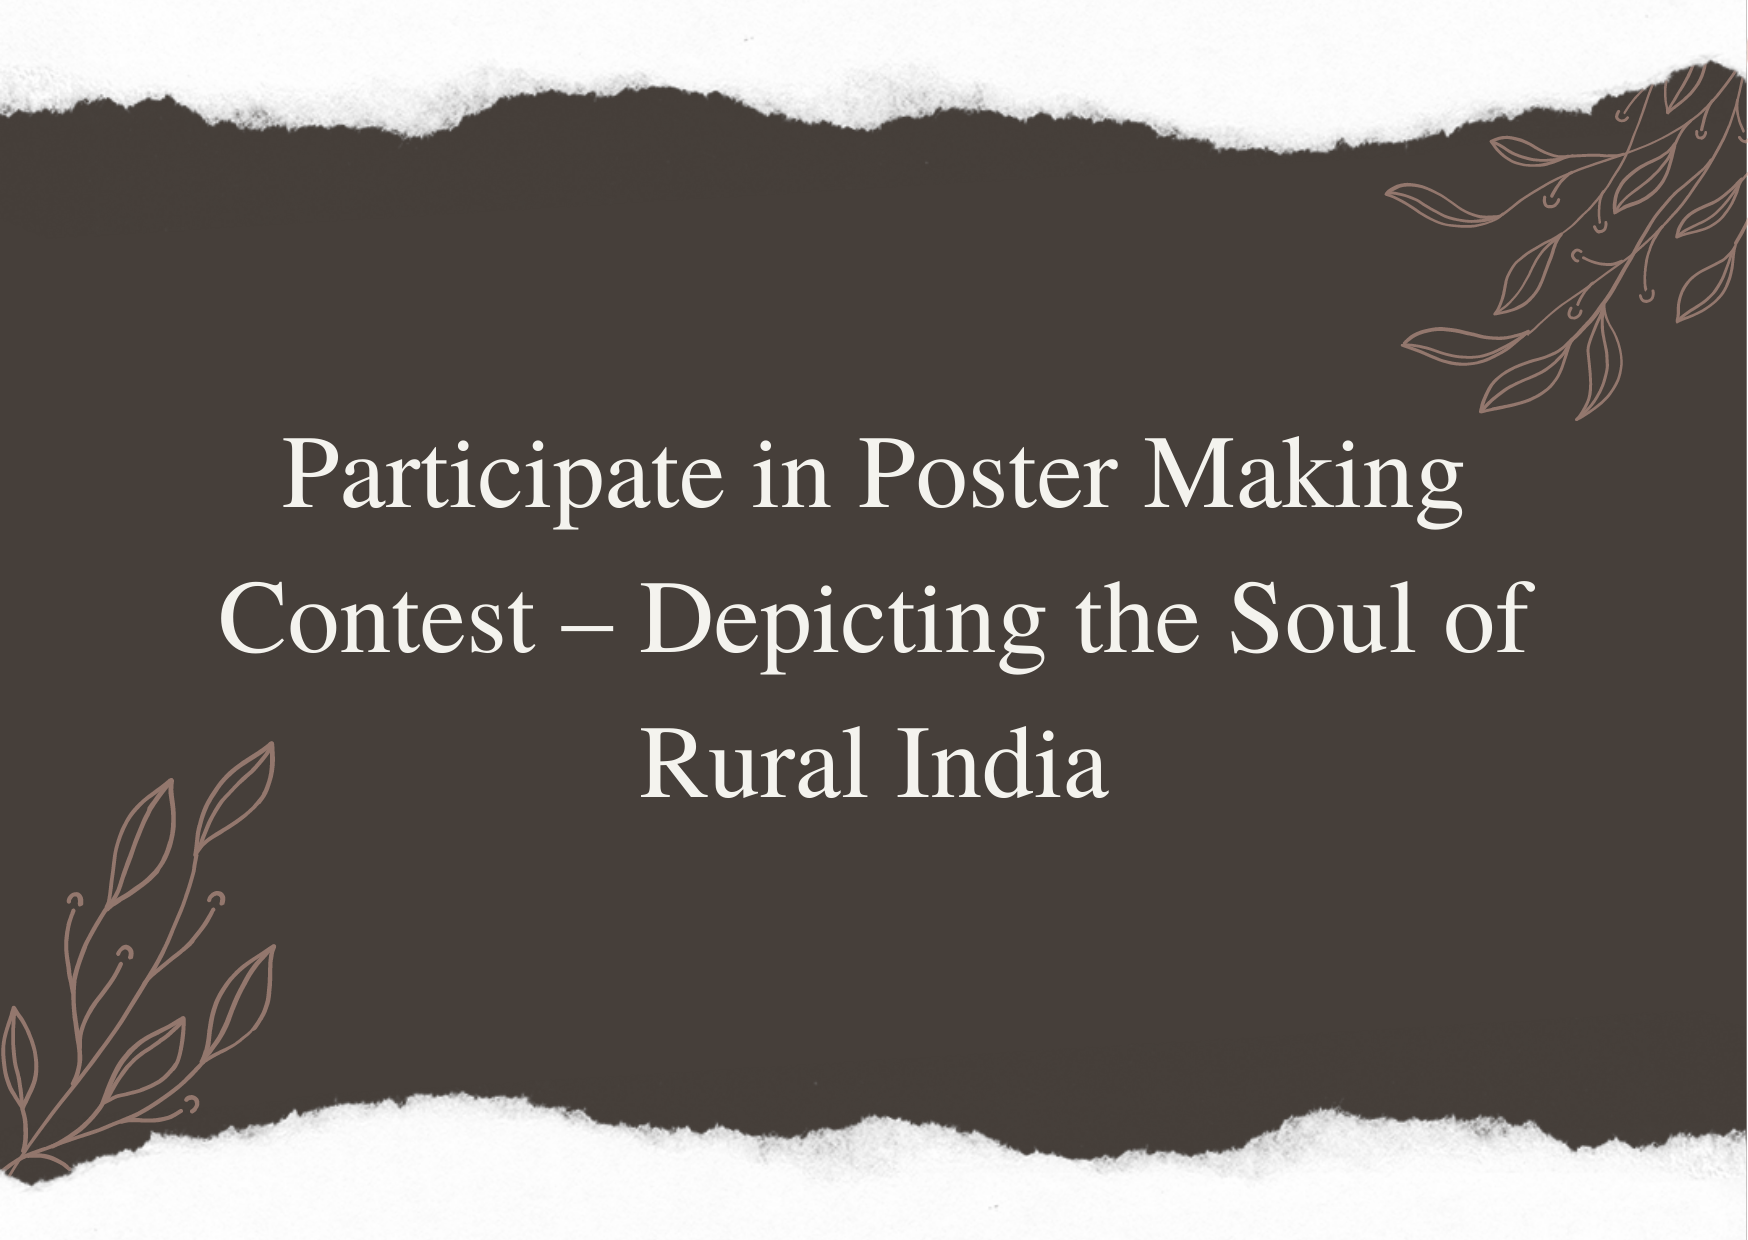 Participate in Poster Making Contest – Depicting the Soul of Rural India